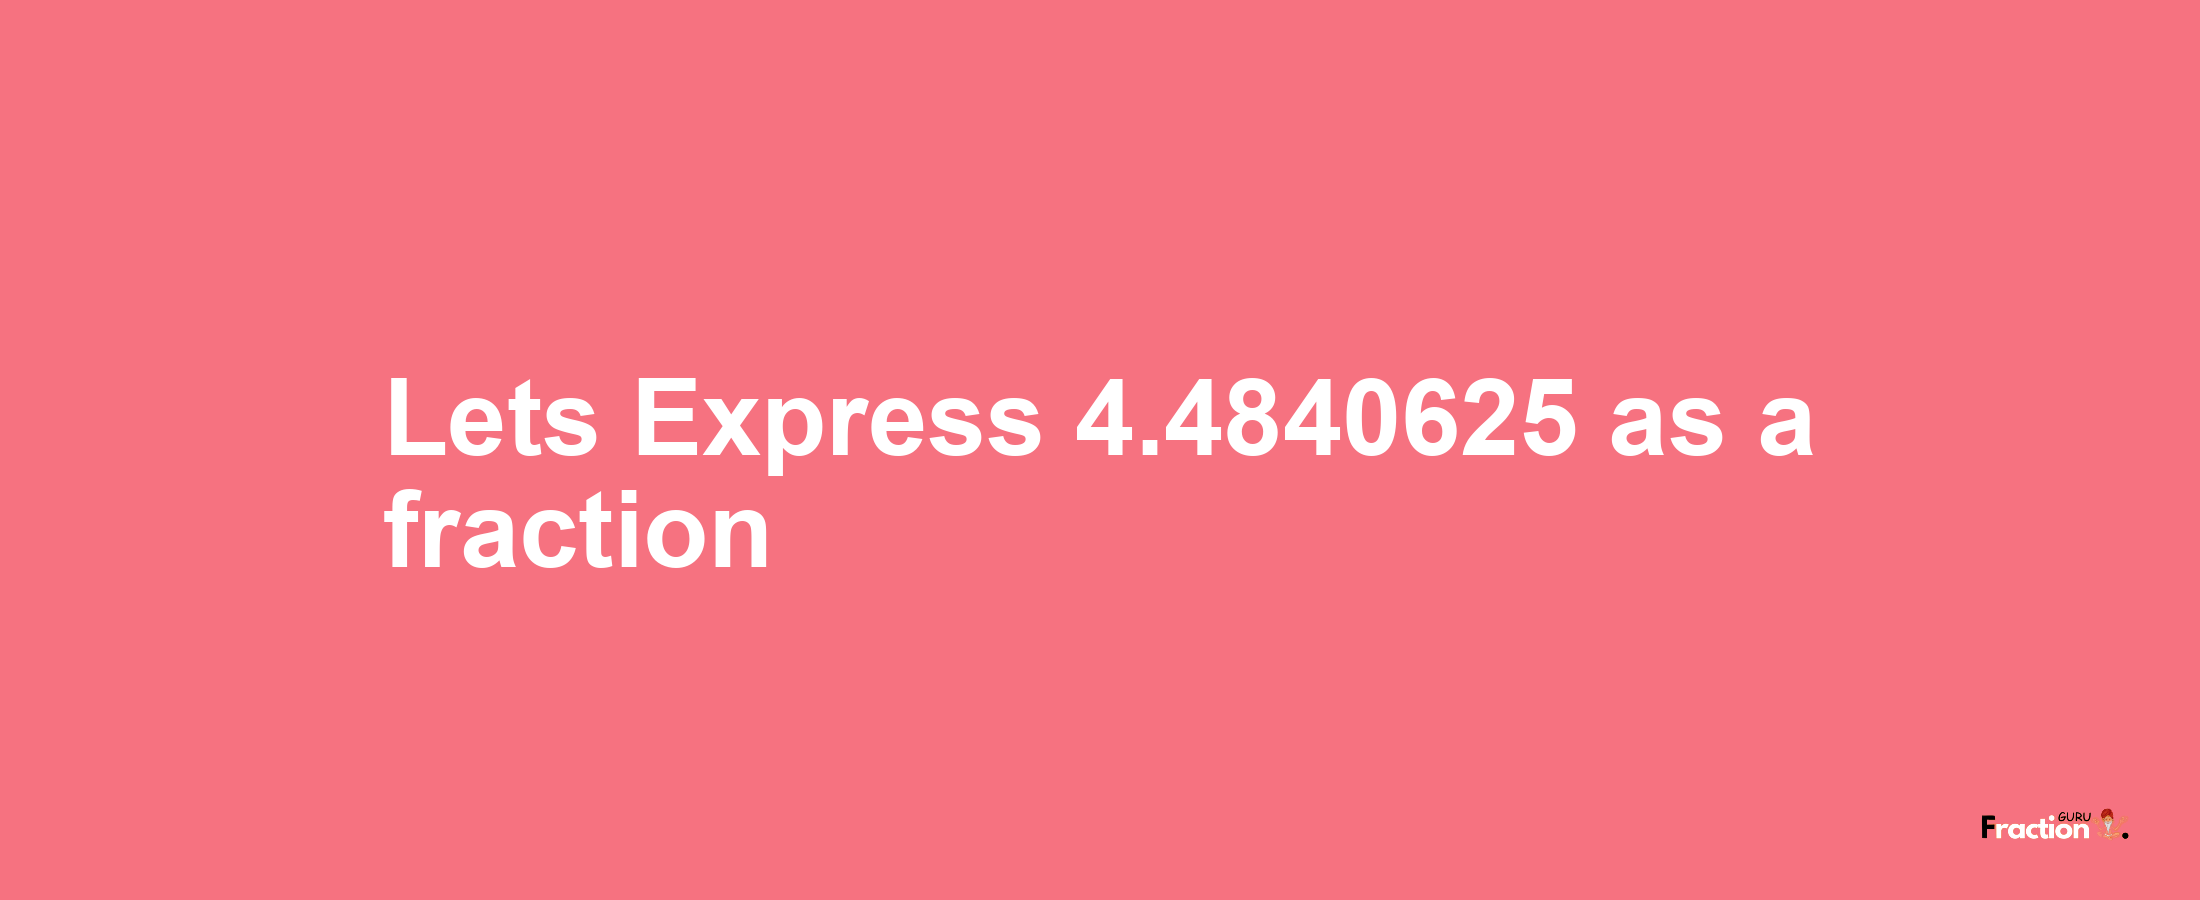 Lets Express 4.4840625 as afraction